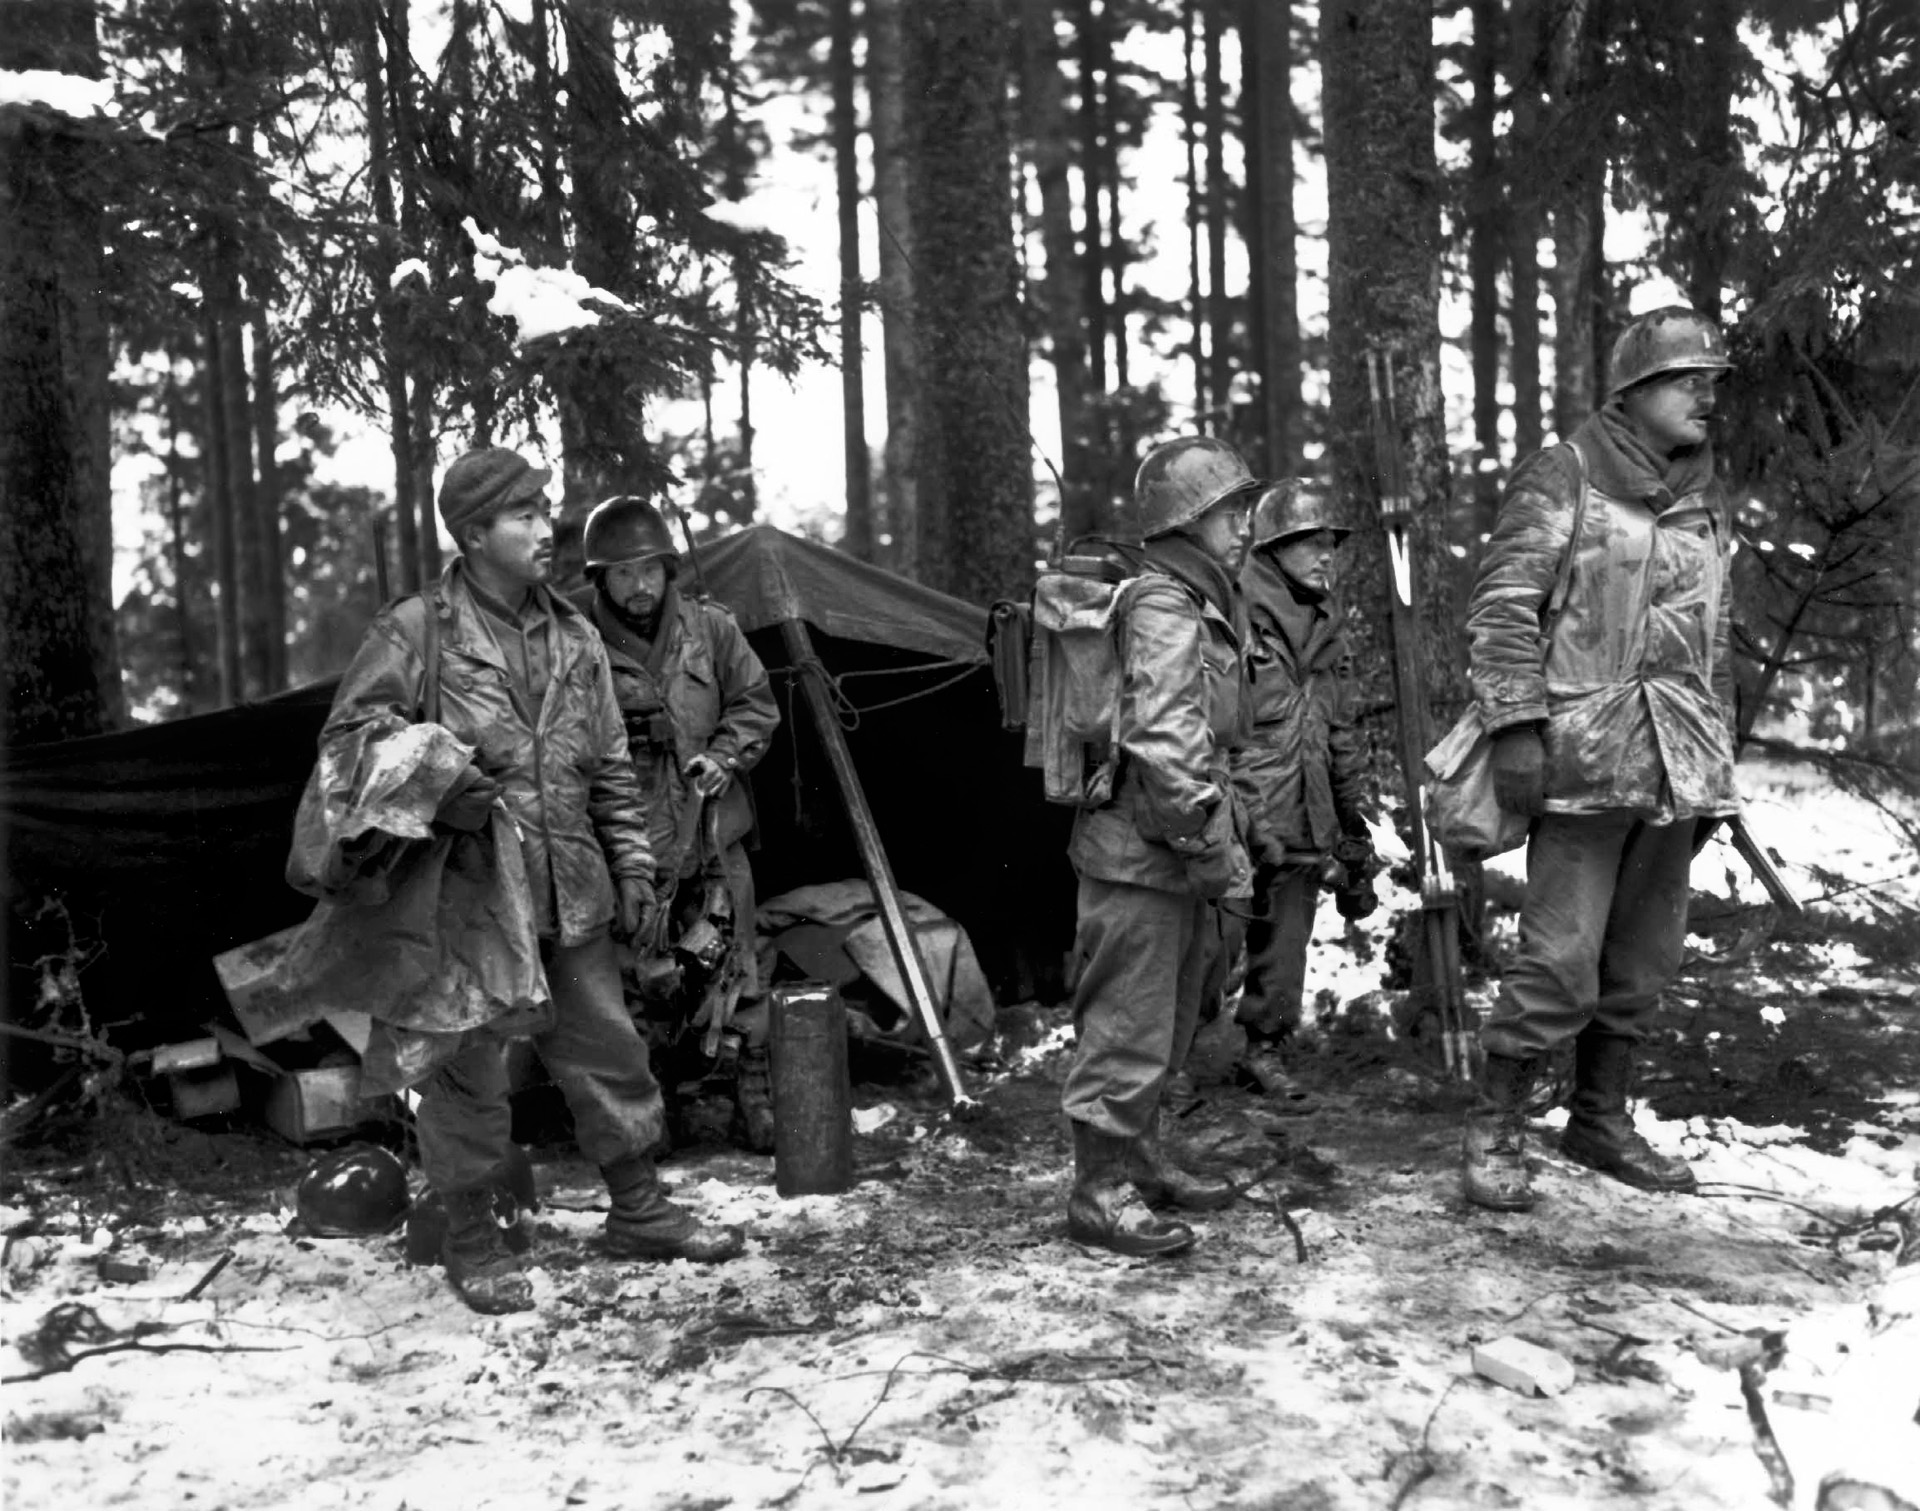 With snow covering the ground in the Vosges region, Bob Yorita, Shigeru Suekuni, Lefty Ichihara, Michio Takata, and Captain Joe Hill of Company F, 2nd Battalion, 442nd RCT, prepare to move to a new command post, November 14, 1944. 